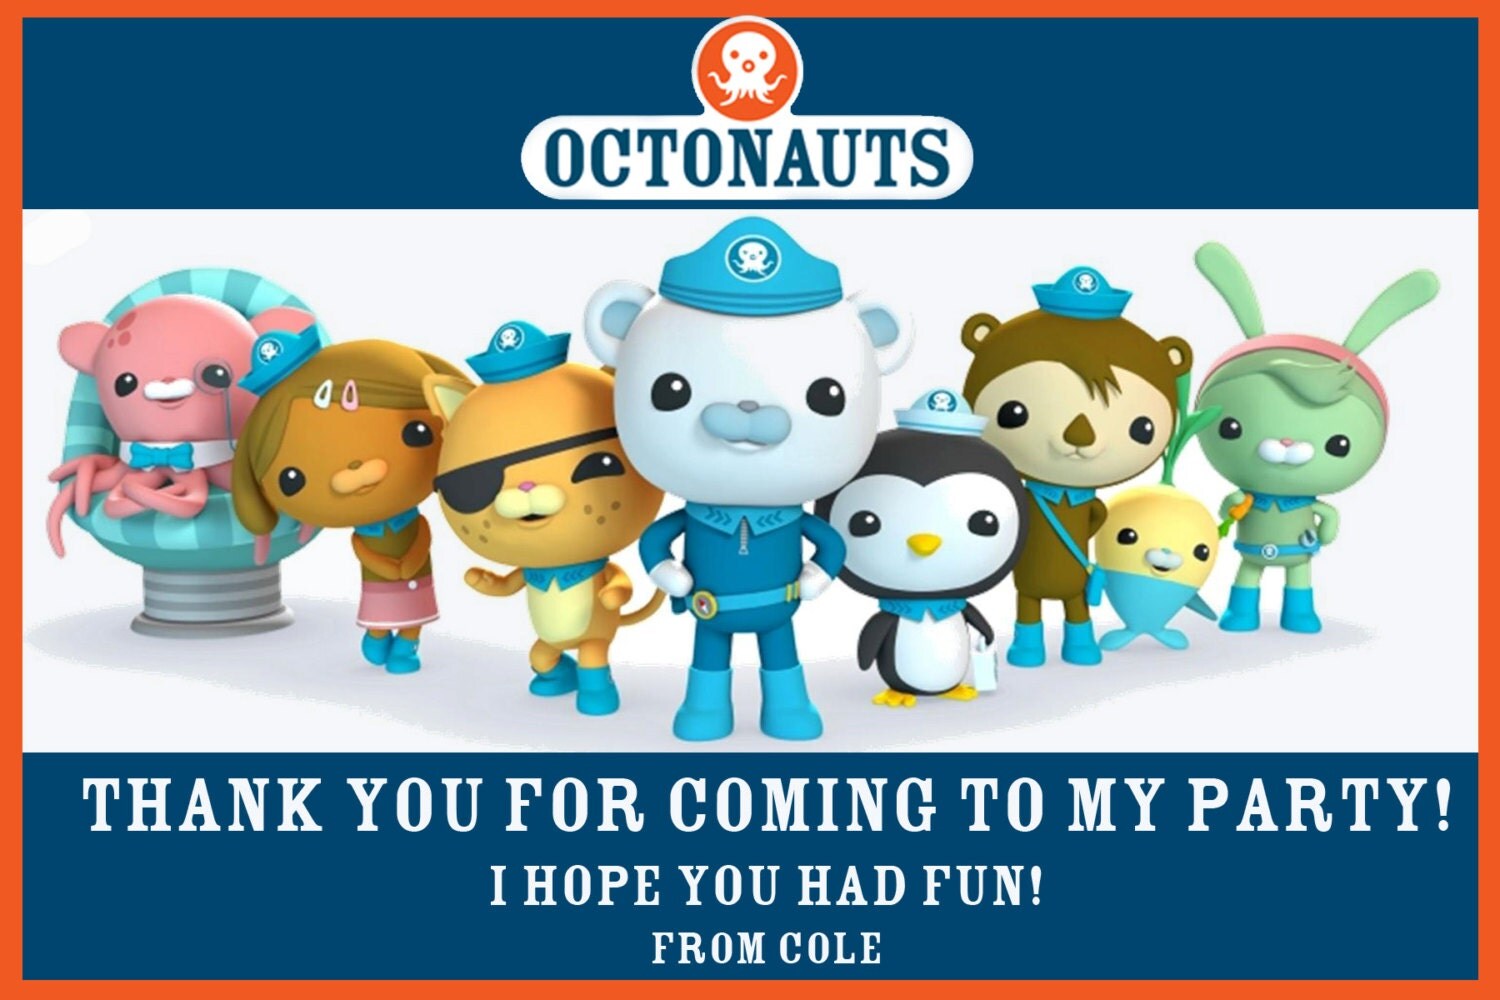 Octonauts Invitation And Thank You Card Printable By 6434